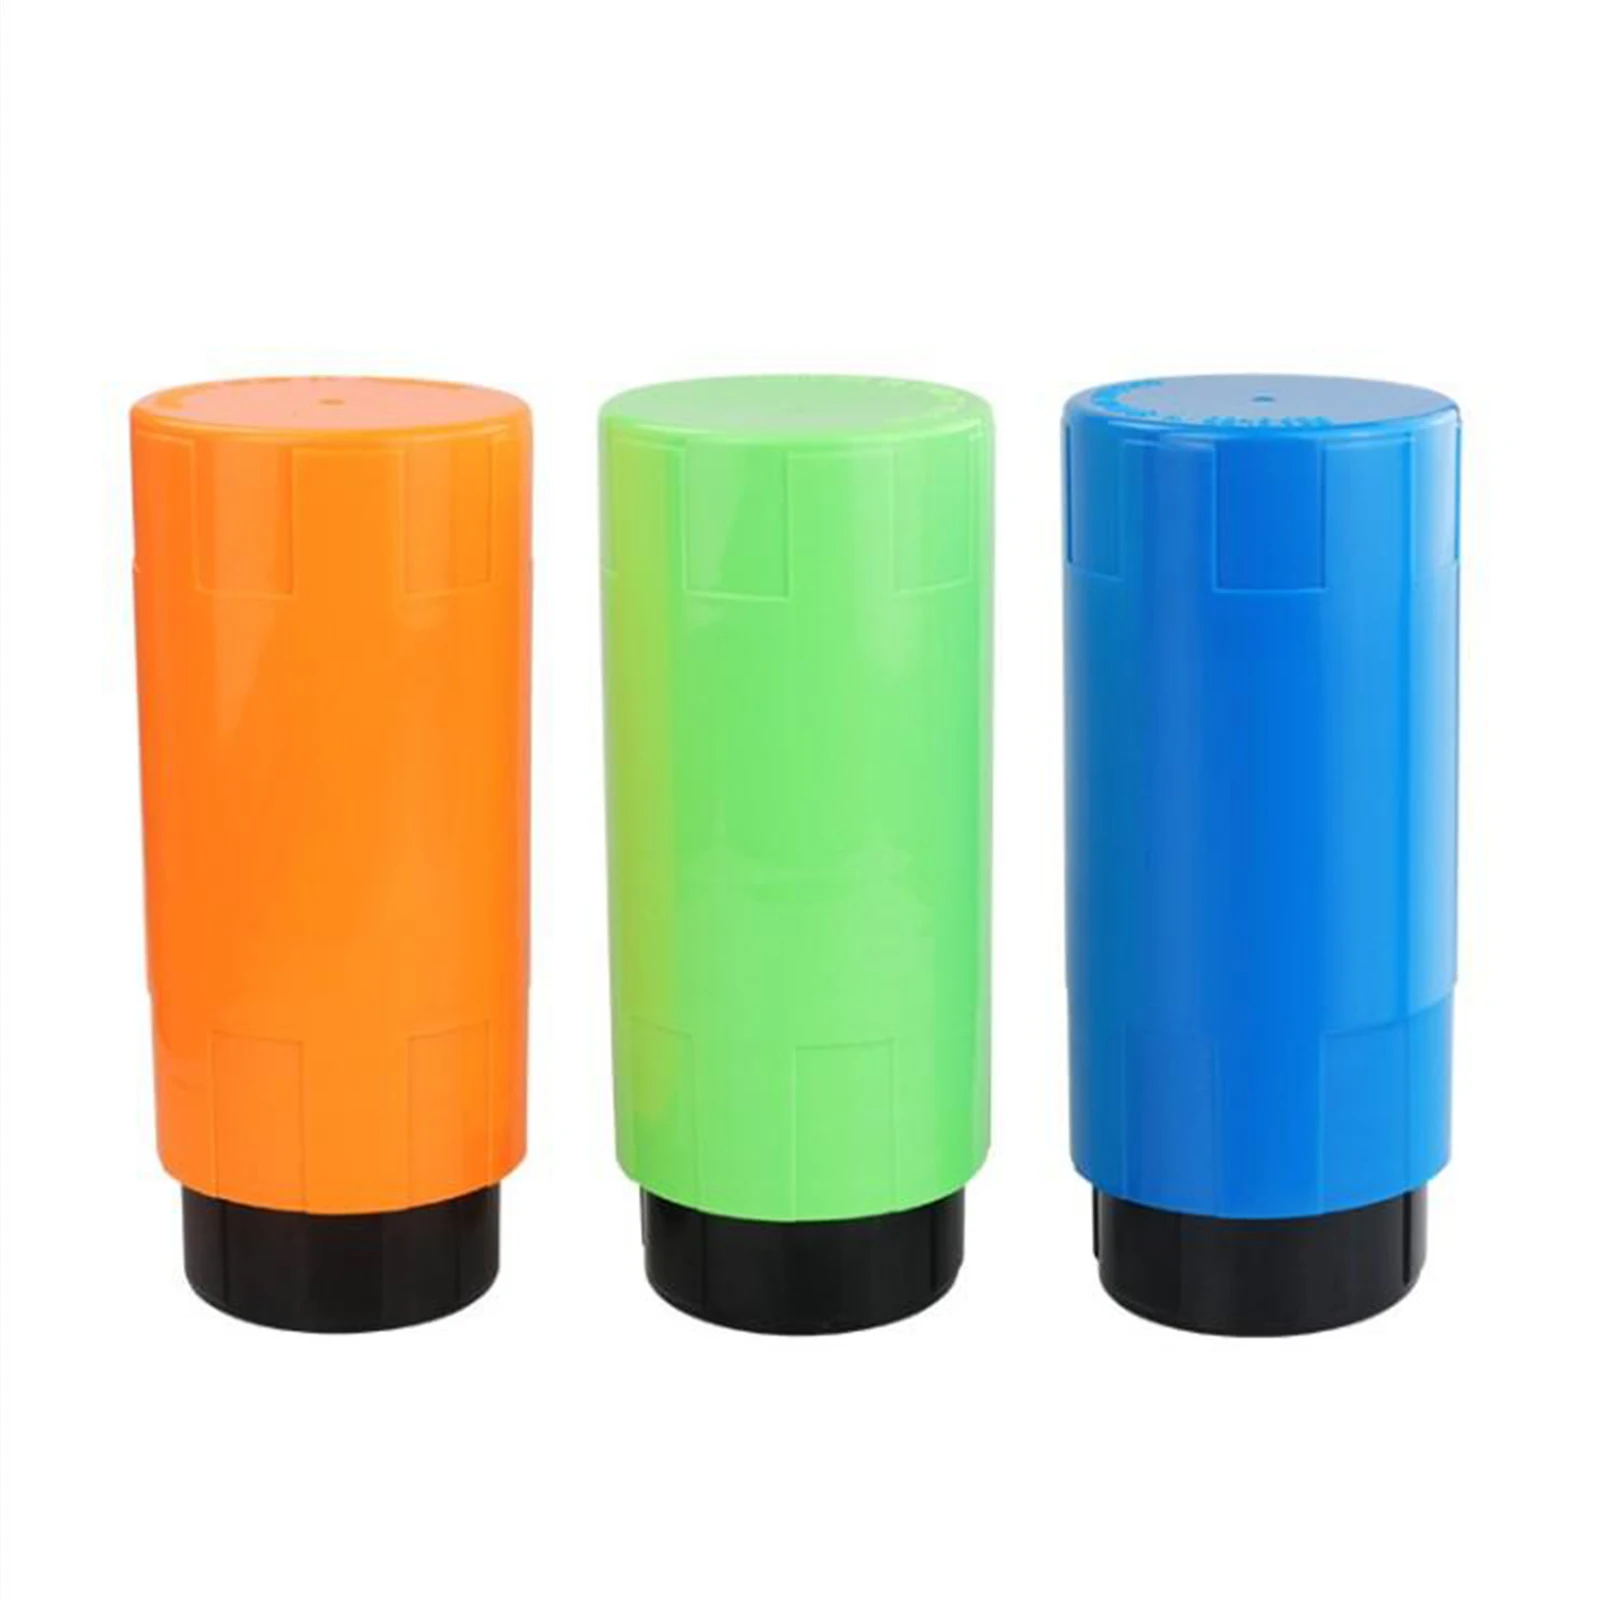 Portable Tennis Ball Saver Container Carrying 3 Balls Pressurizer Equipment